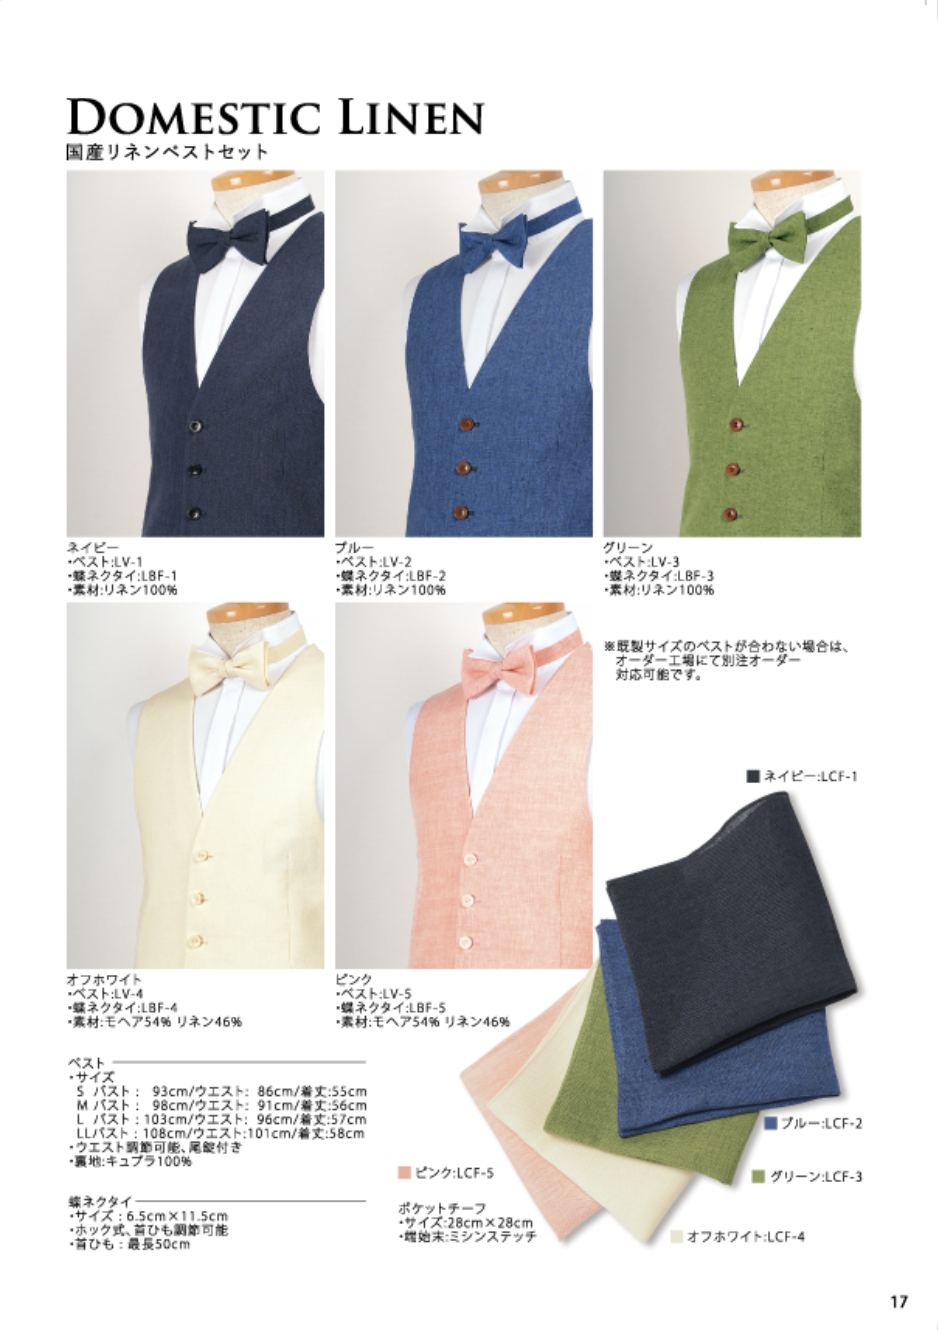 EXCY FORMAL ACCESSORY COLLECTION Vol.8 pg.17